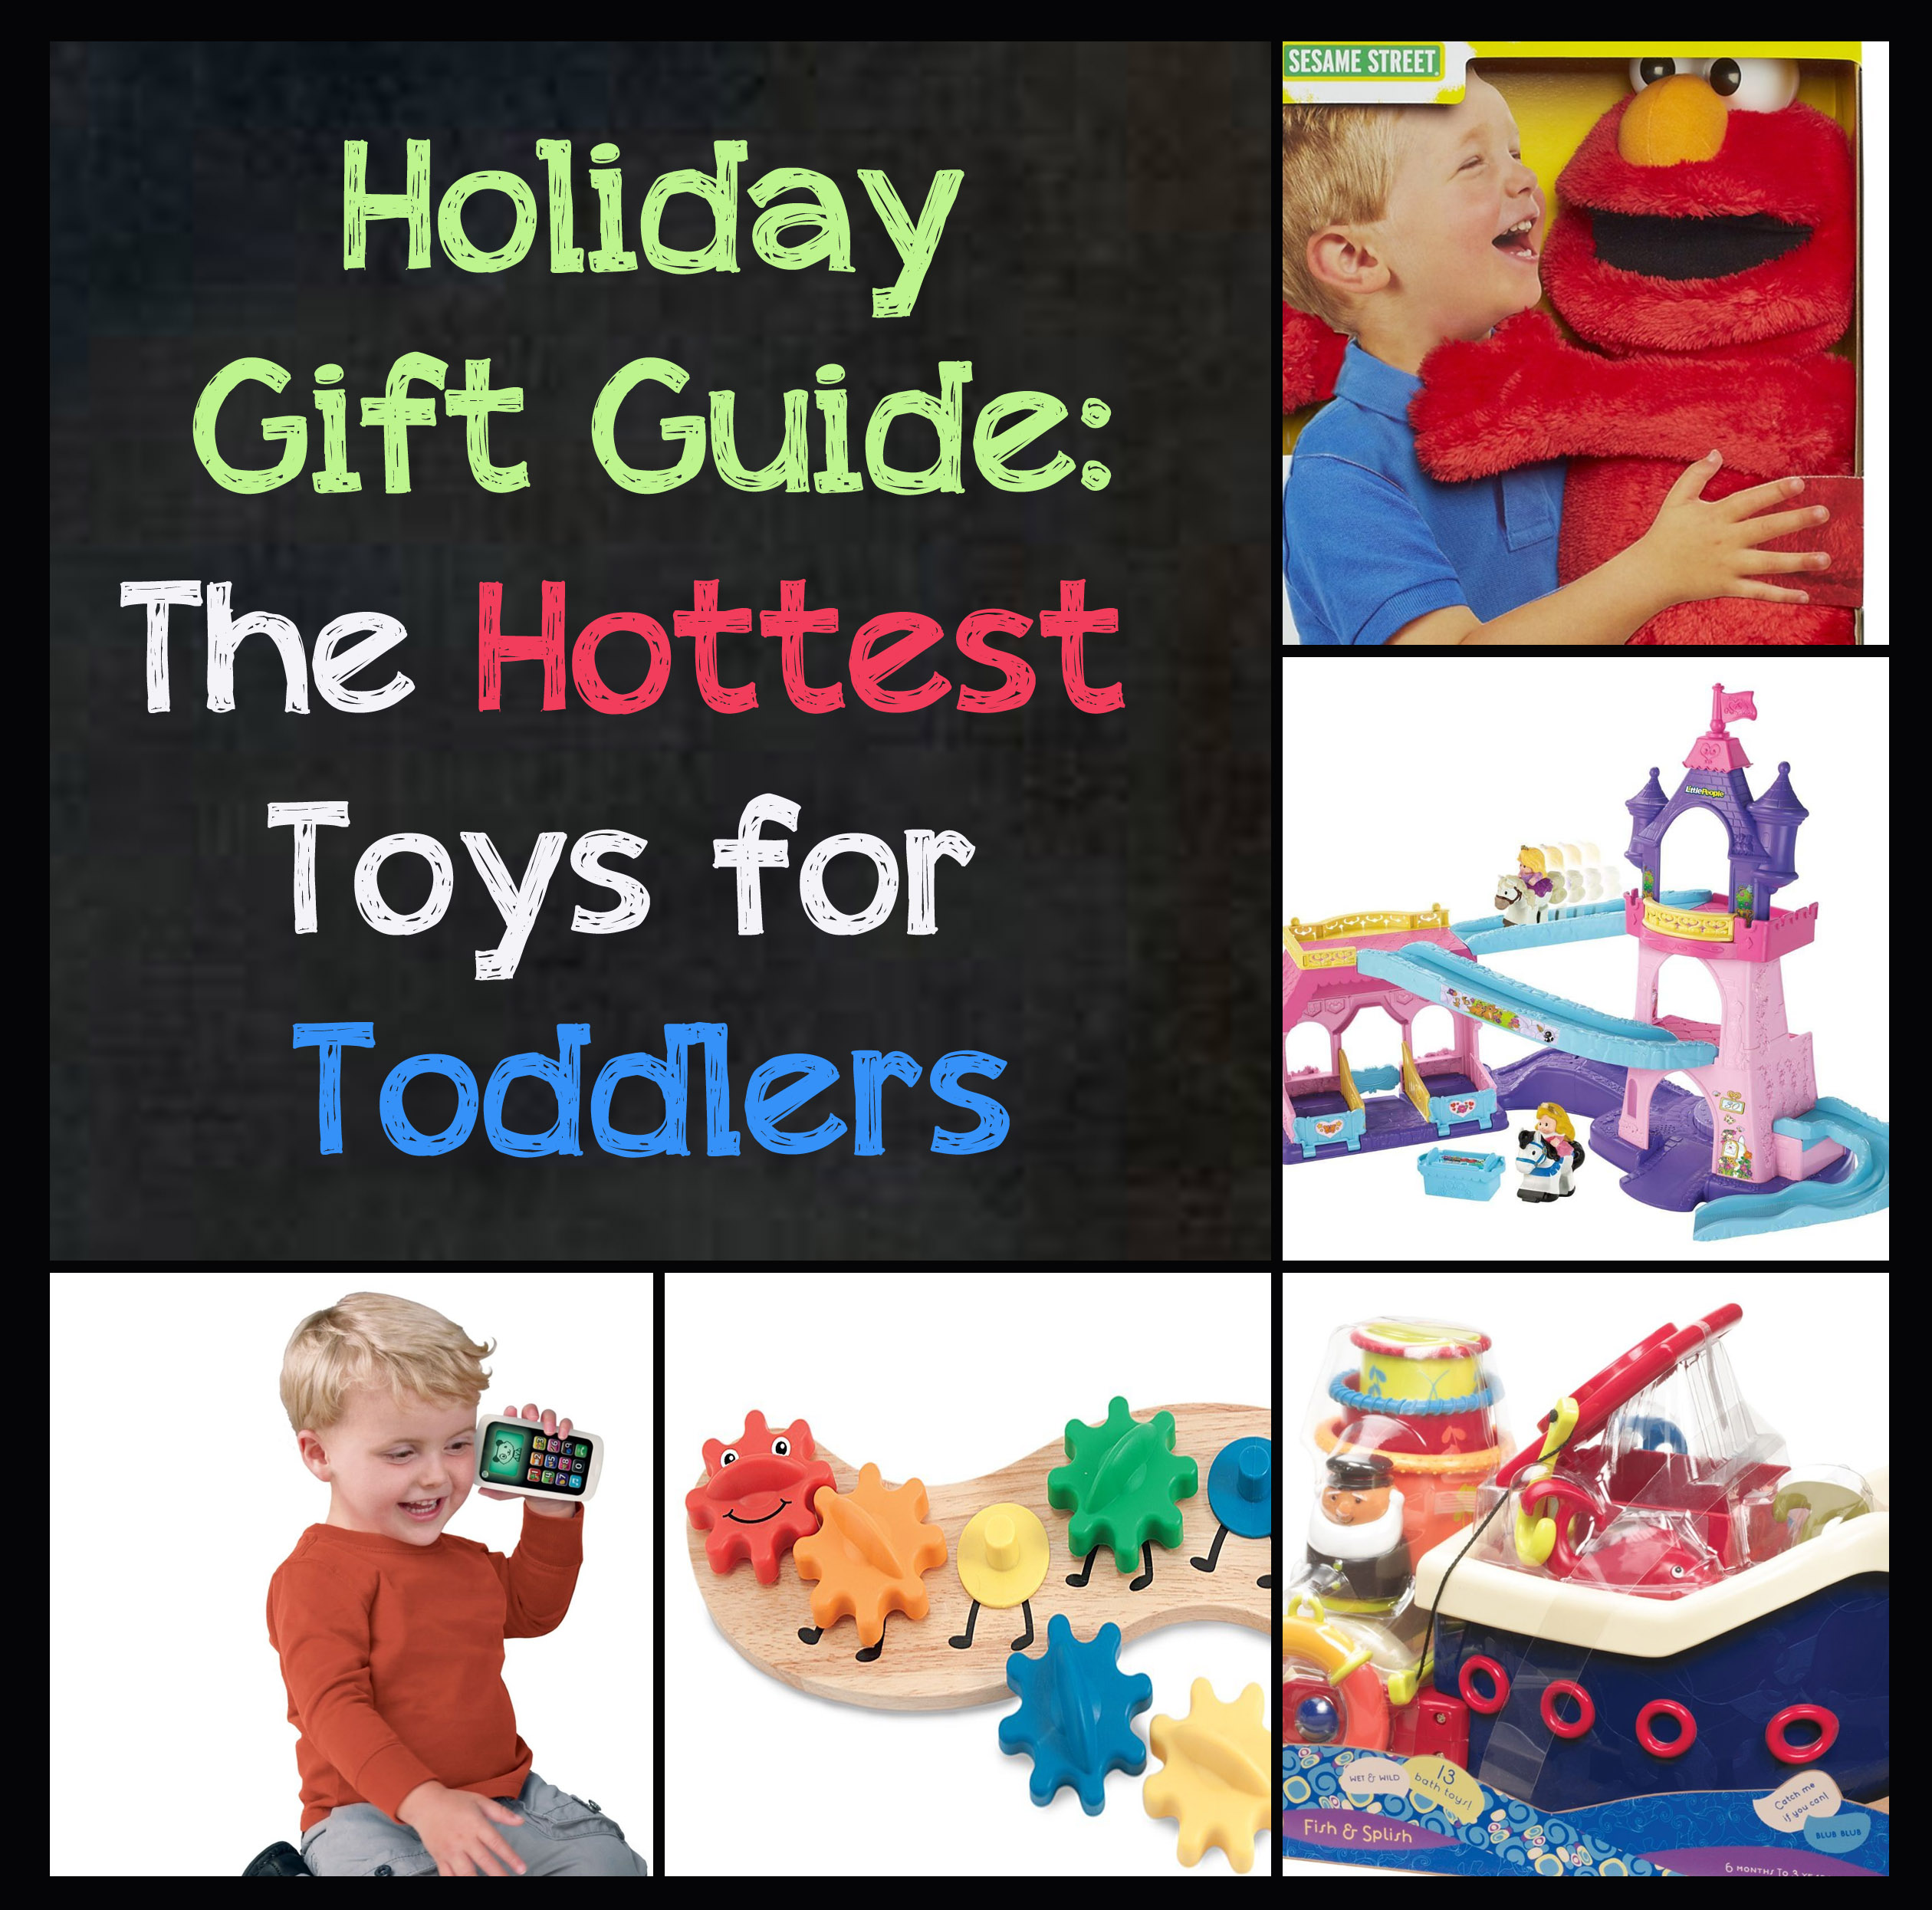 The Hottest Toys for Toddlers – Holiday Season 2013 Gift Guide